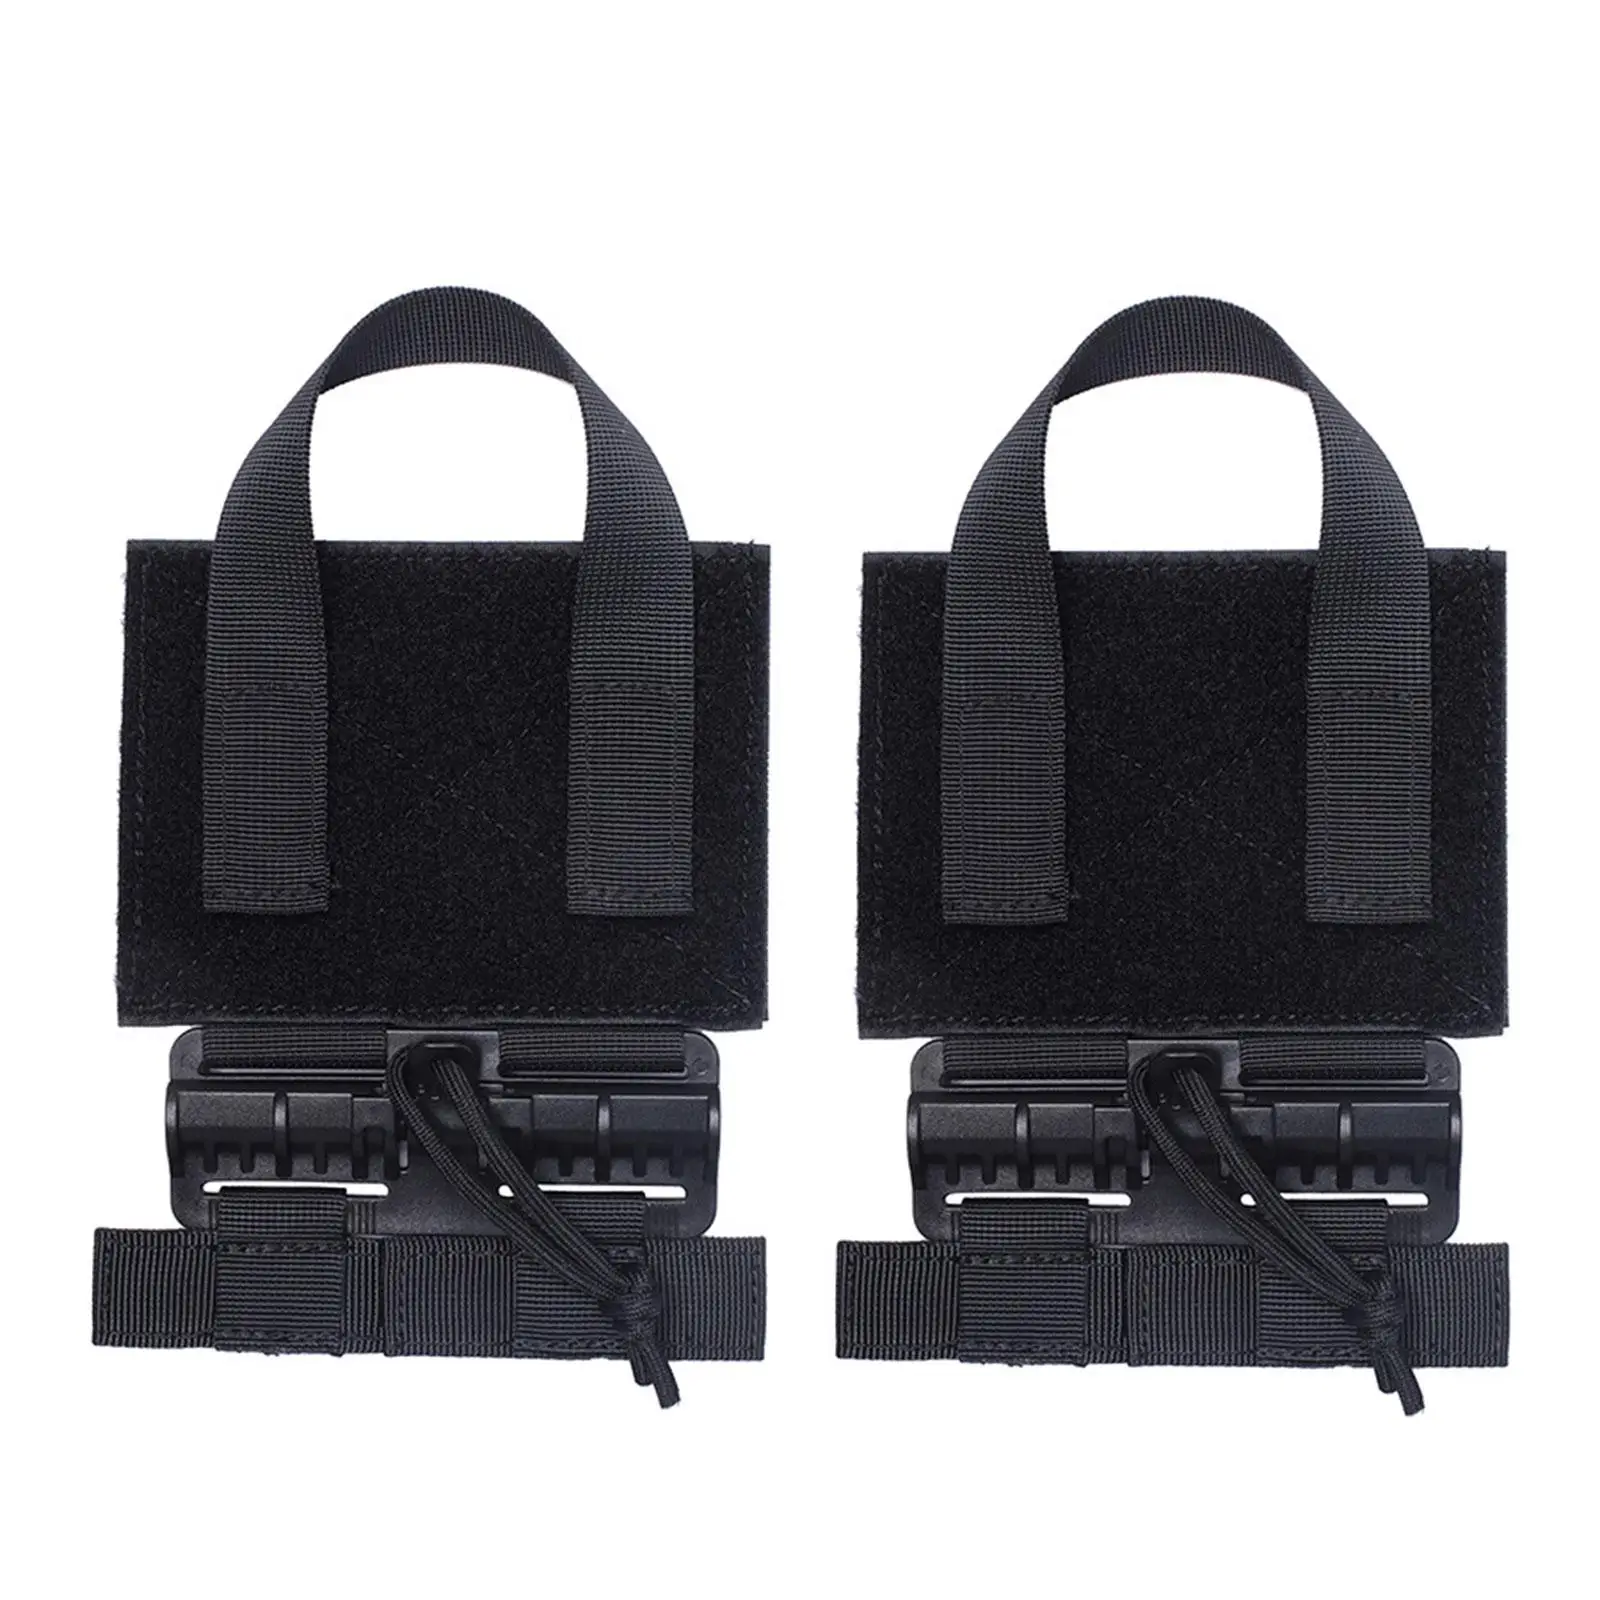 2 Pieces Vest Quick Release Buckle Set Cummerbund Adapter Portable Single Point Universal Assembly Durable for Cosplay Tool 6094